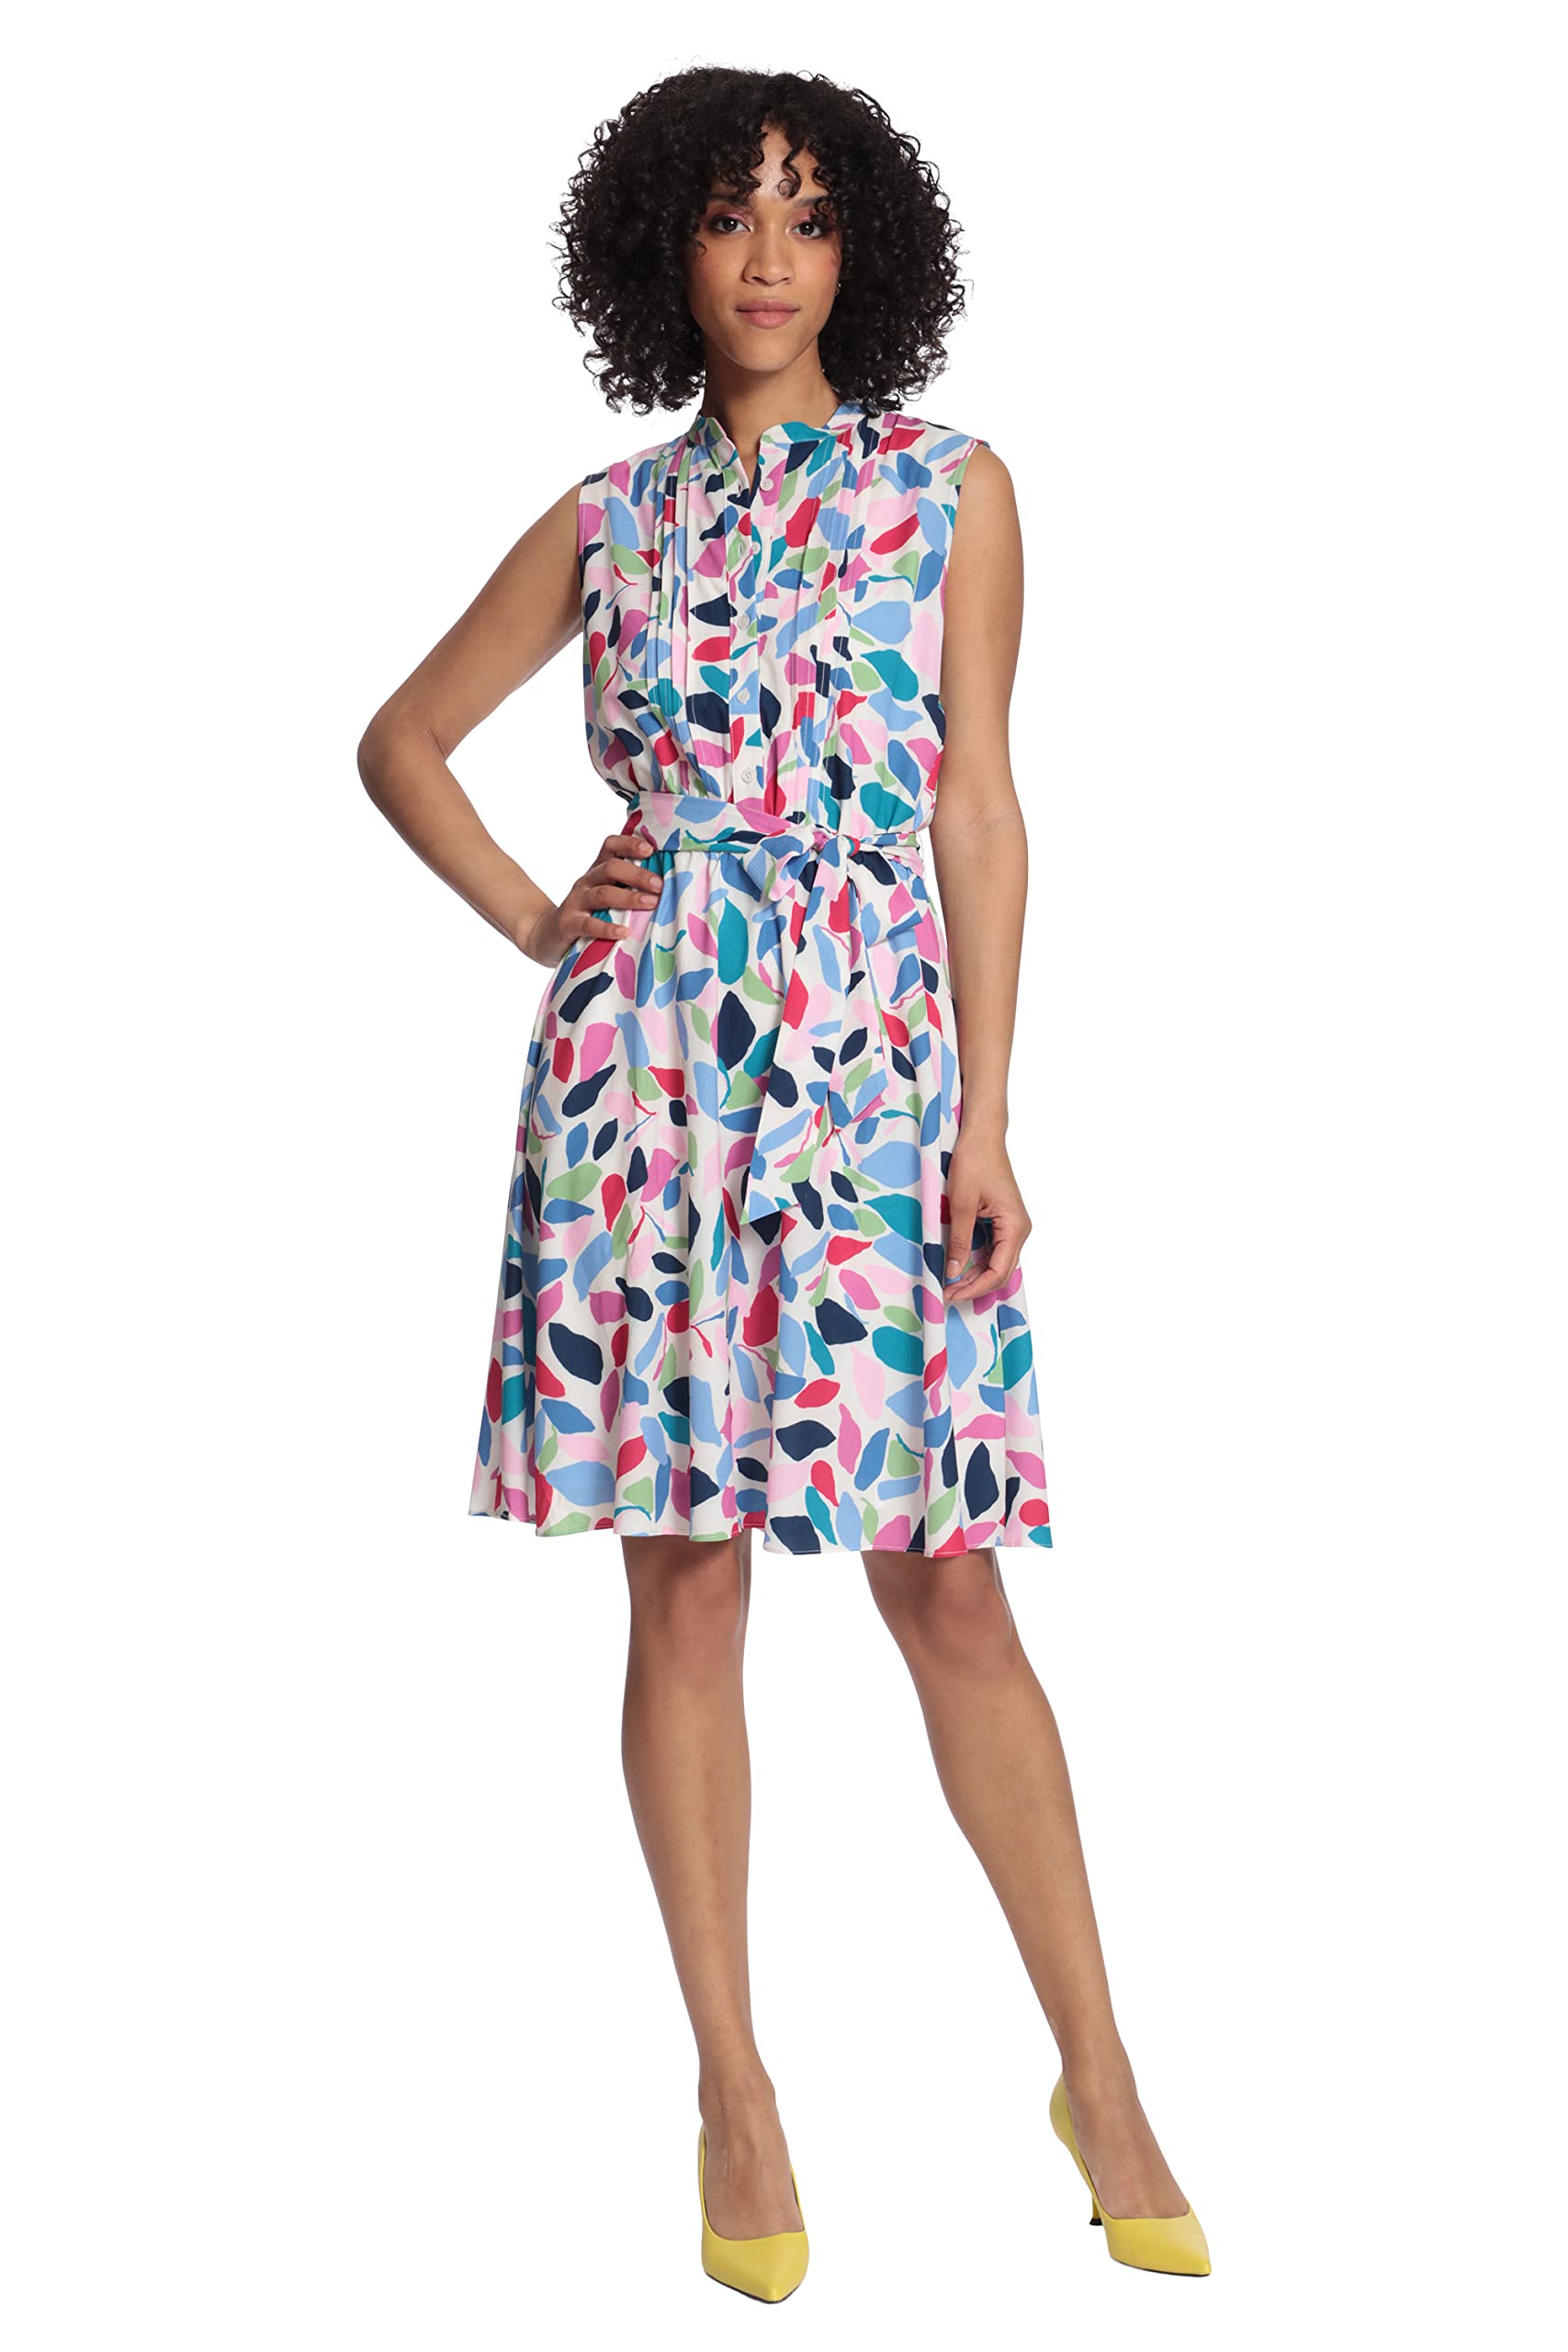 Maggy London Women's Leaf Printed Sleeveless Shirt Dress with Pleated Bodice and Waist Tie